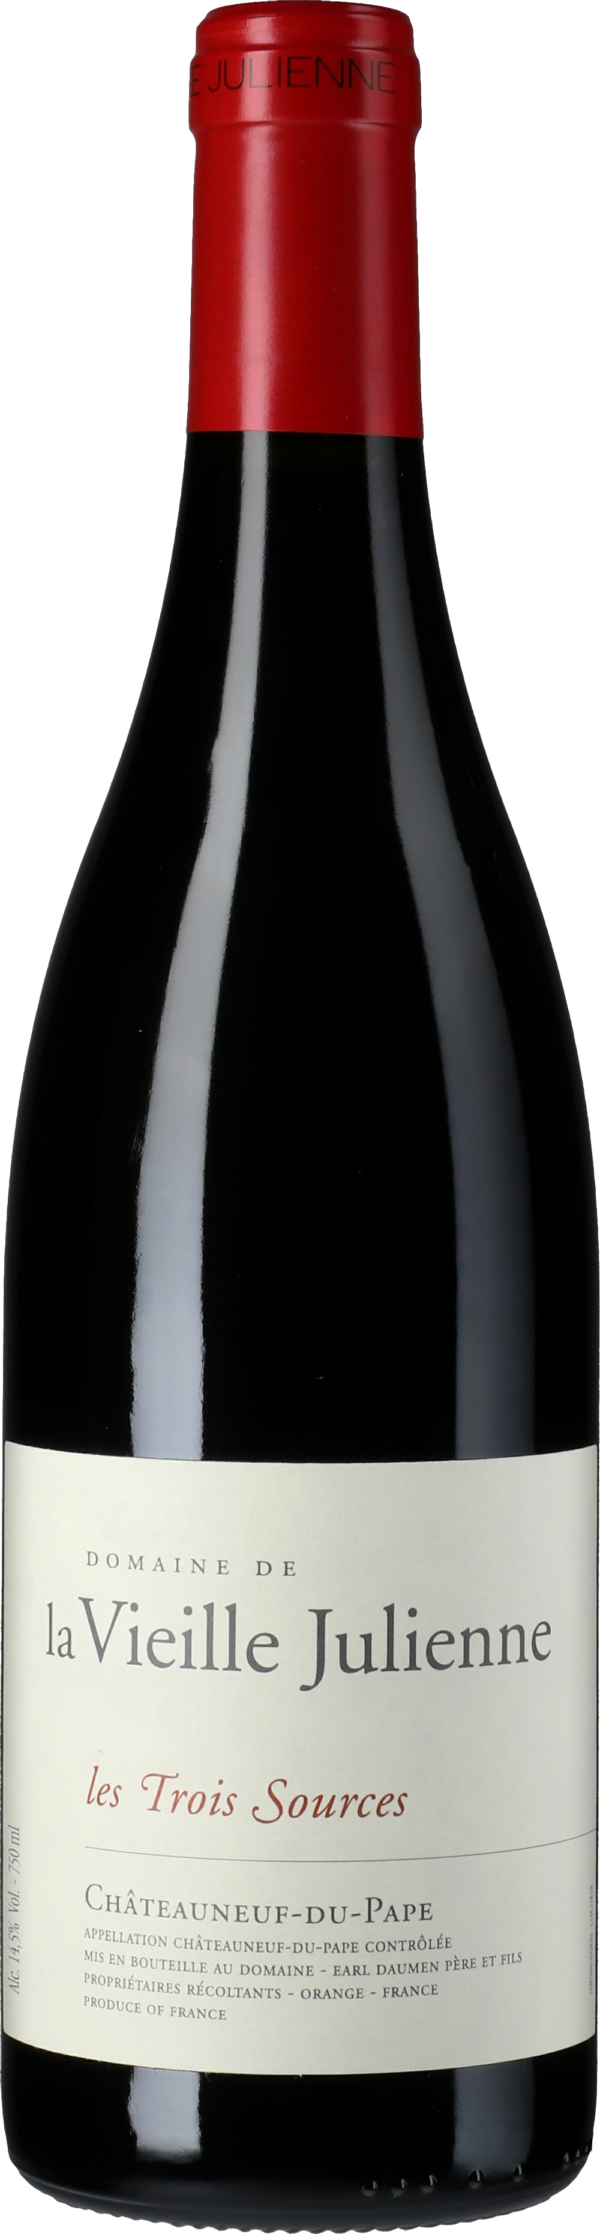 Product image of Vieille Julienne Chateauneuf du Pape les Trois Sources 2019 from 8wines